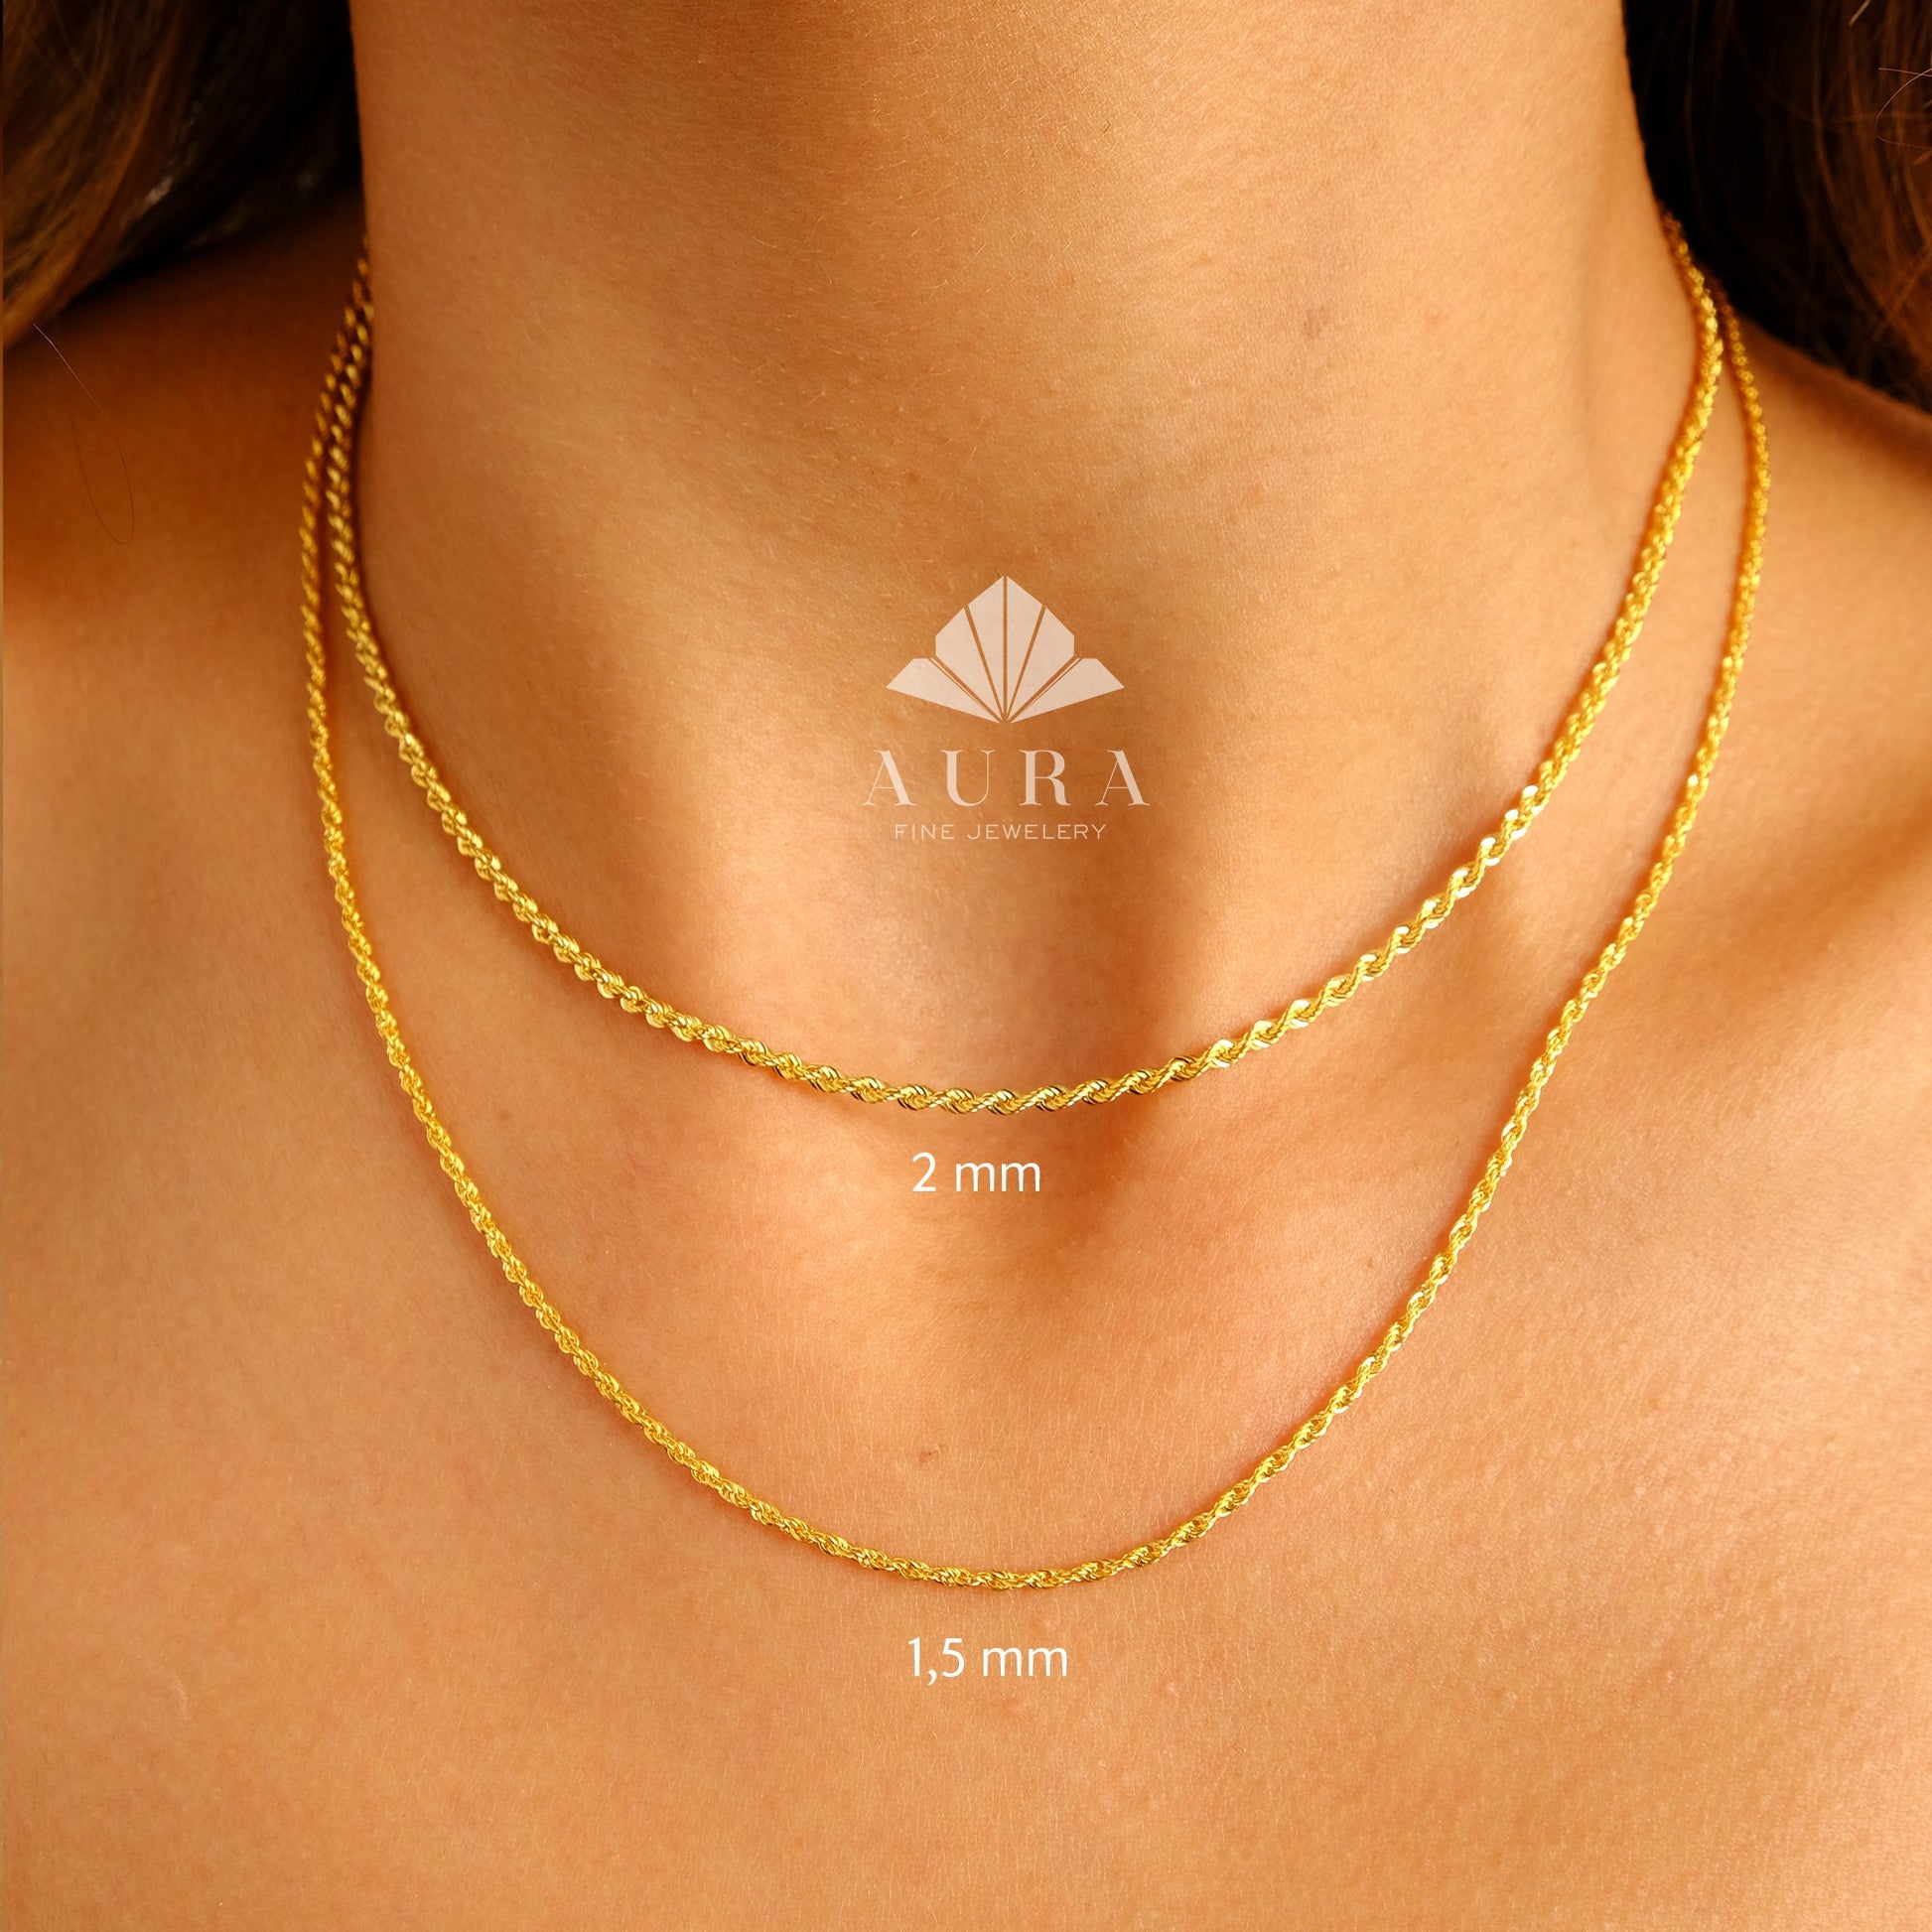 14K Gold Rope Chain Necklace 1mm 1.5mm 2mm 3mm 3.5mm 4mm Diamond Cut Choker, Dainty Necklace, Men Women Necklace, Gift For Her